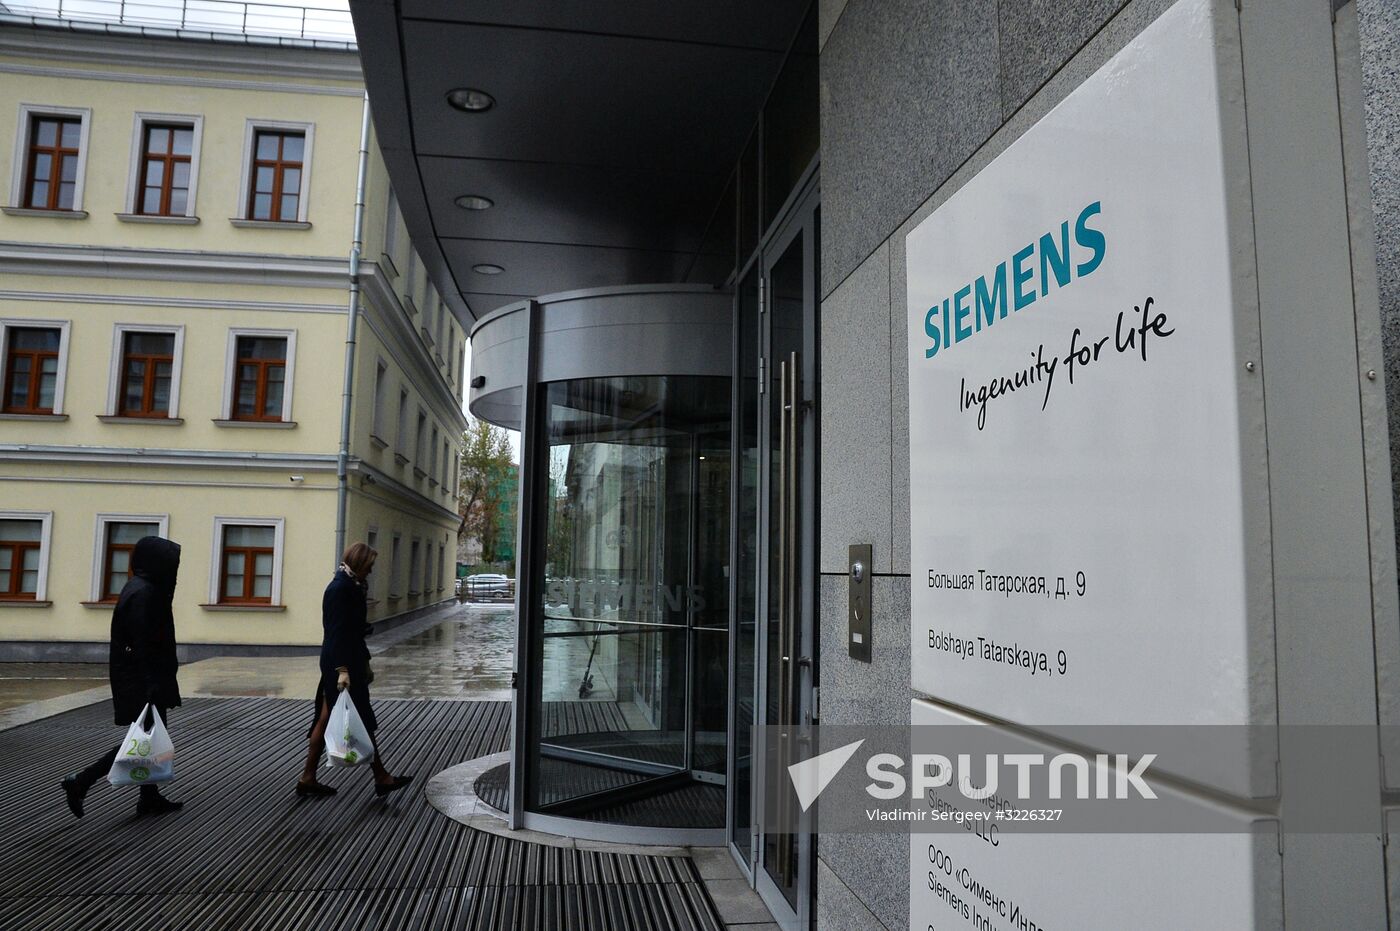 Siemens office in Moscow